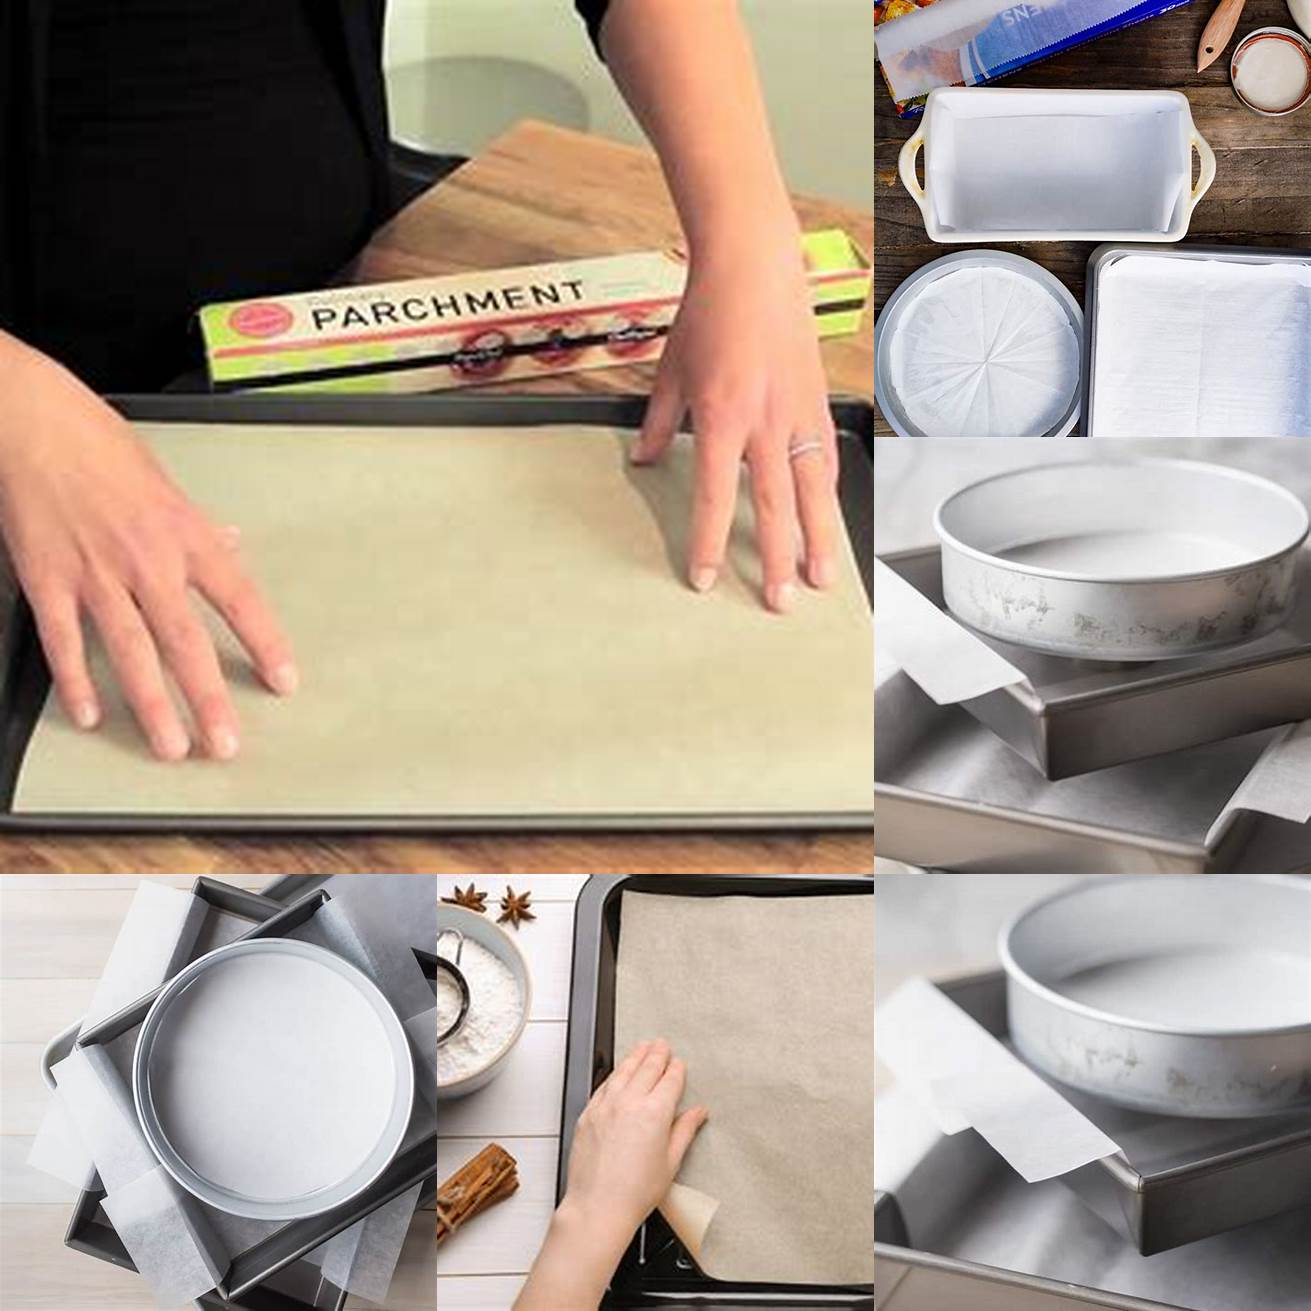 Line your baking sheets with parchment paper